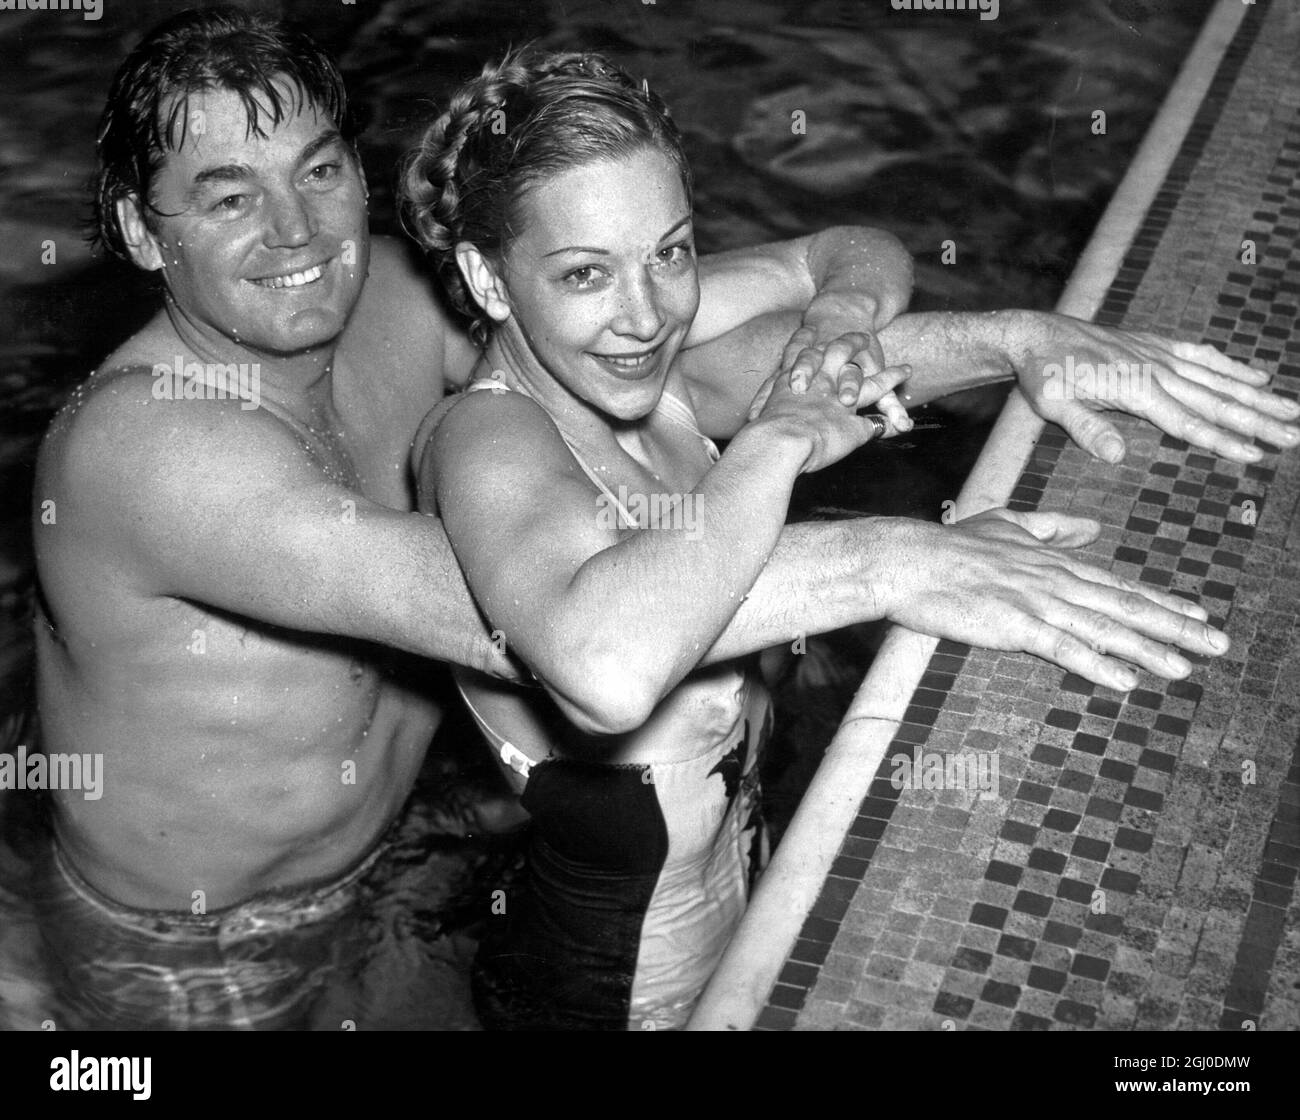 Johnny Weismuller and Belita at the Marshall Street Baths, practising for their display which is shortly to be seen at the Health and Holidays Exhibition, at Earls Court. 16th Febraury 1948. Stock Photo